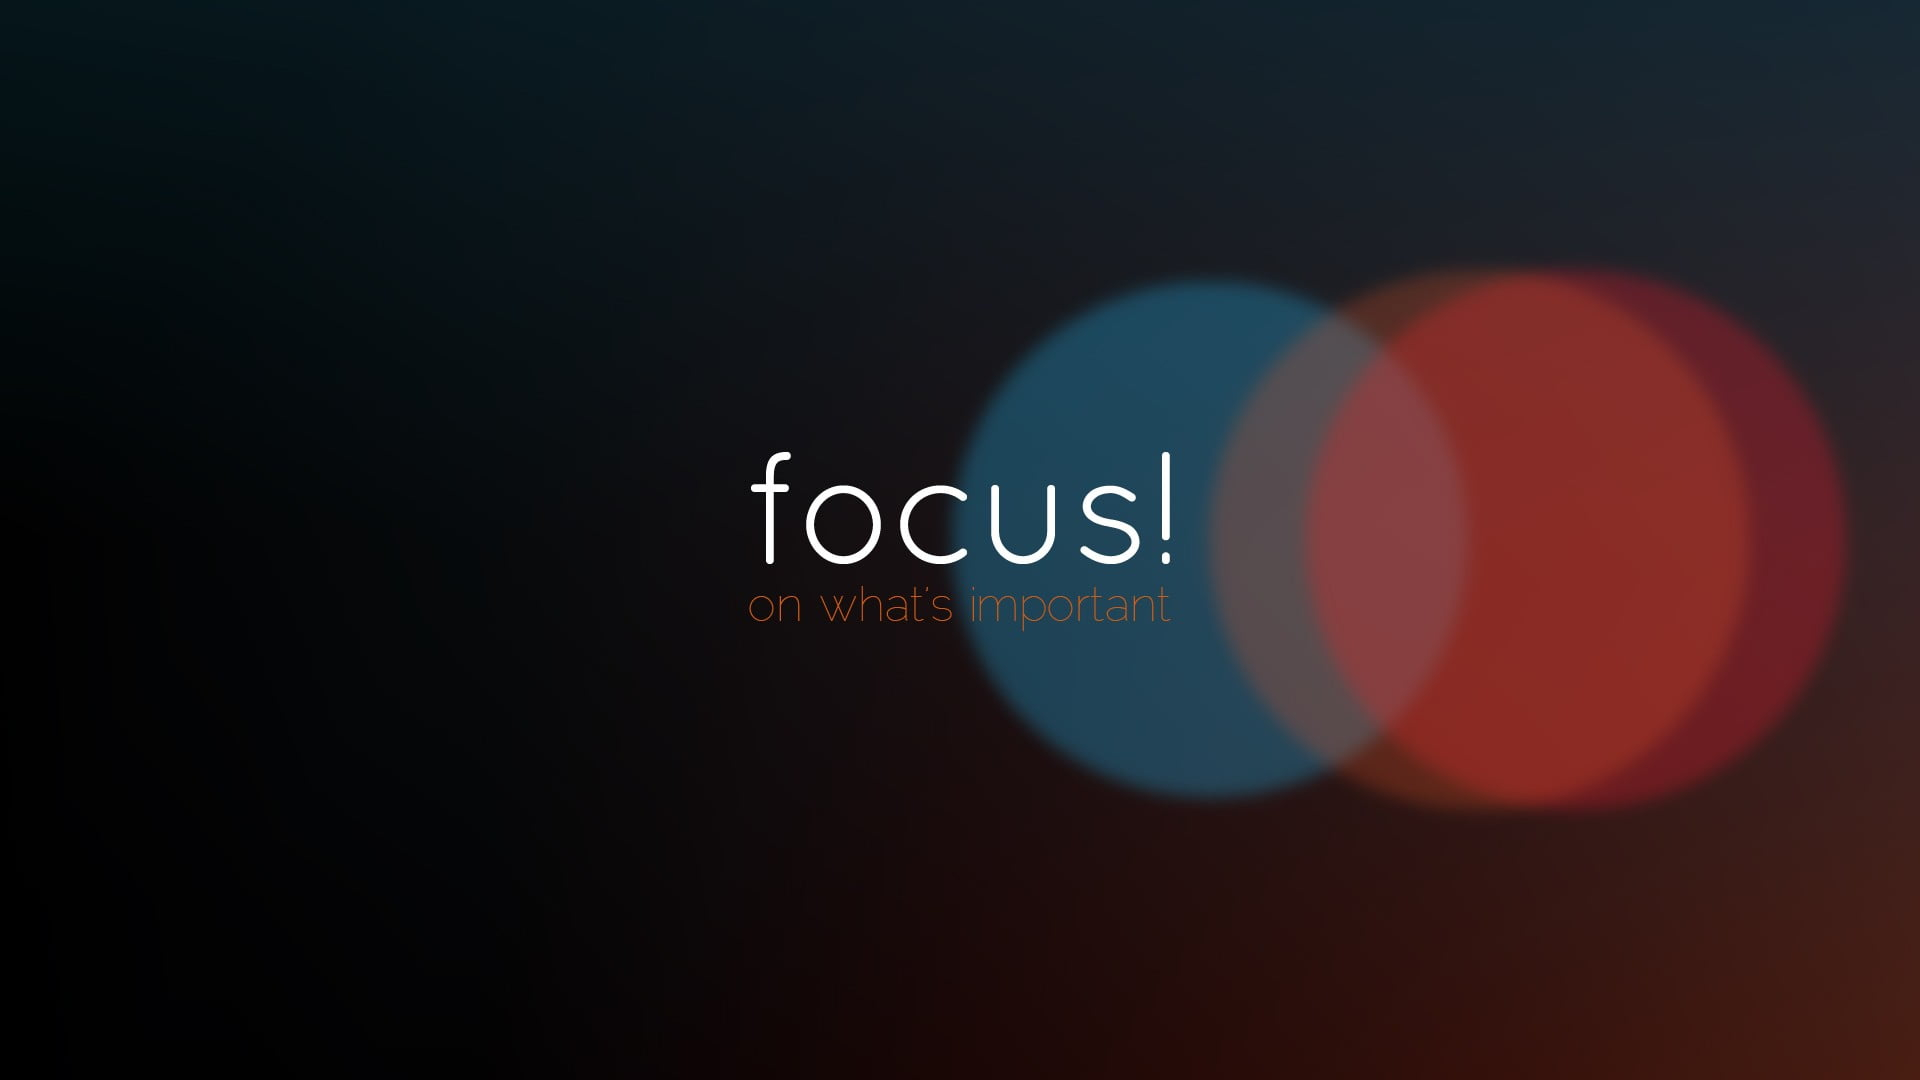 Wallpaper Focus text screenshot, Focus! on what's important text with red and blue bokeh light background